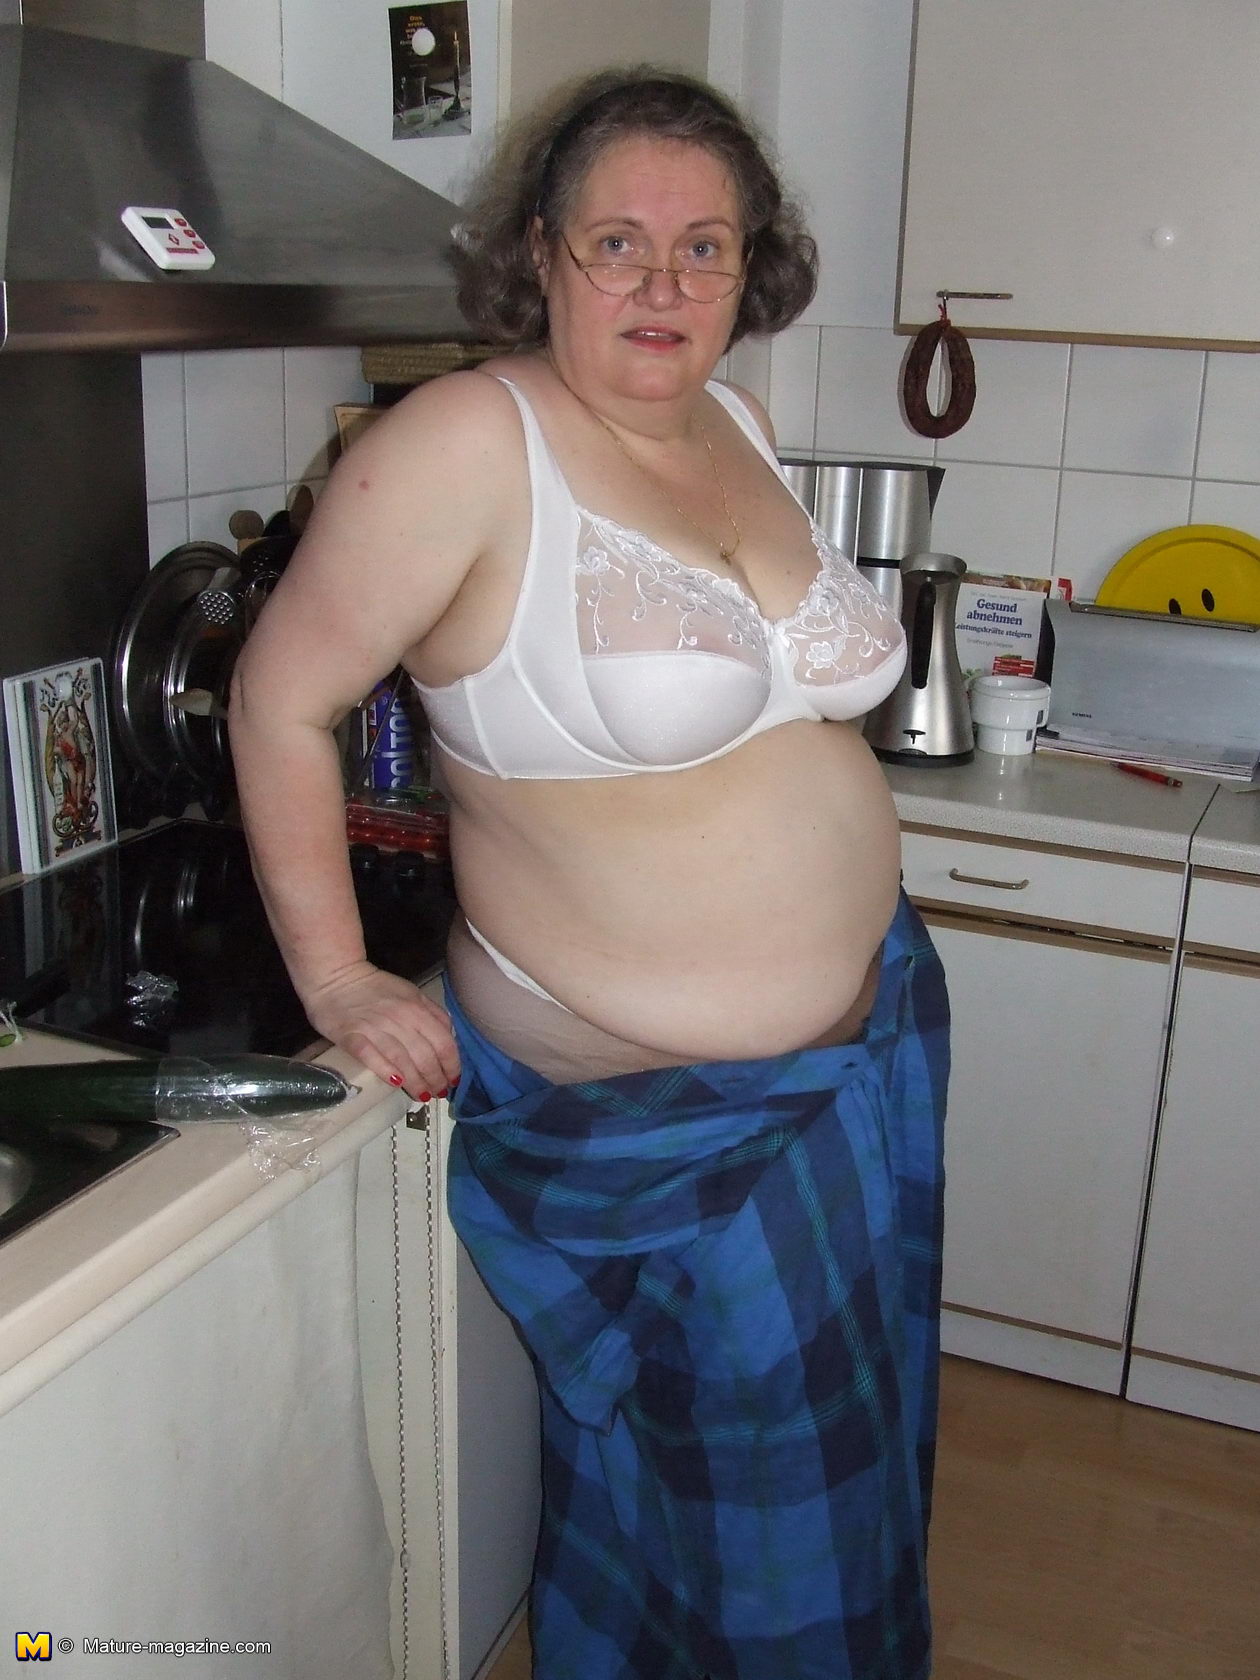 Nasty Mature Bbw Housewife - Amateur chubby housewife getting nasty in the kitchen ...